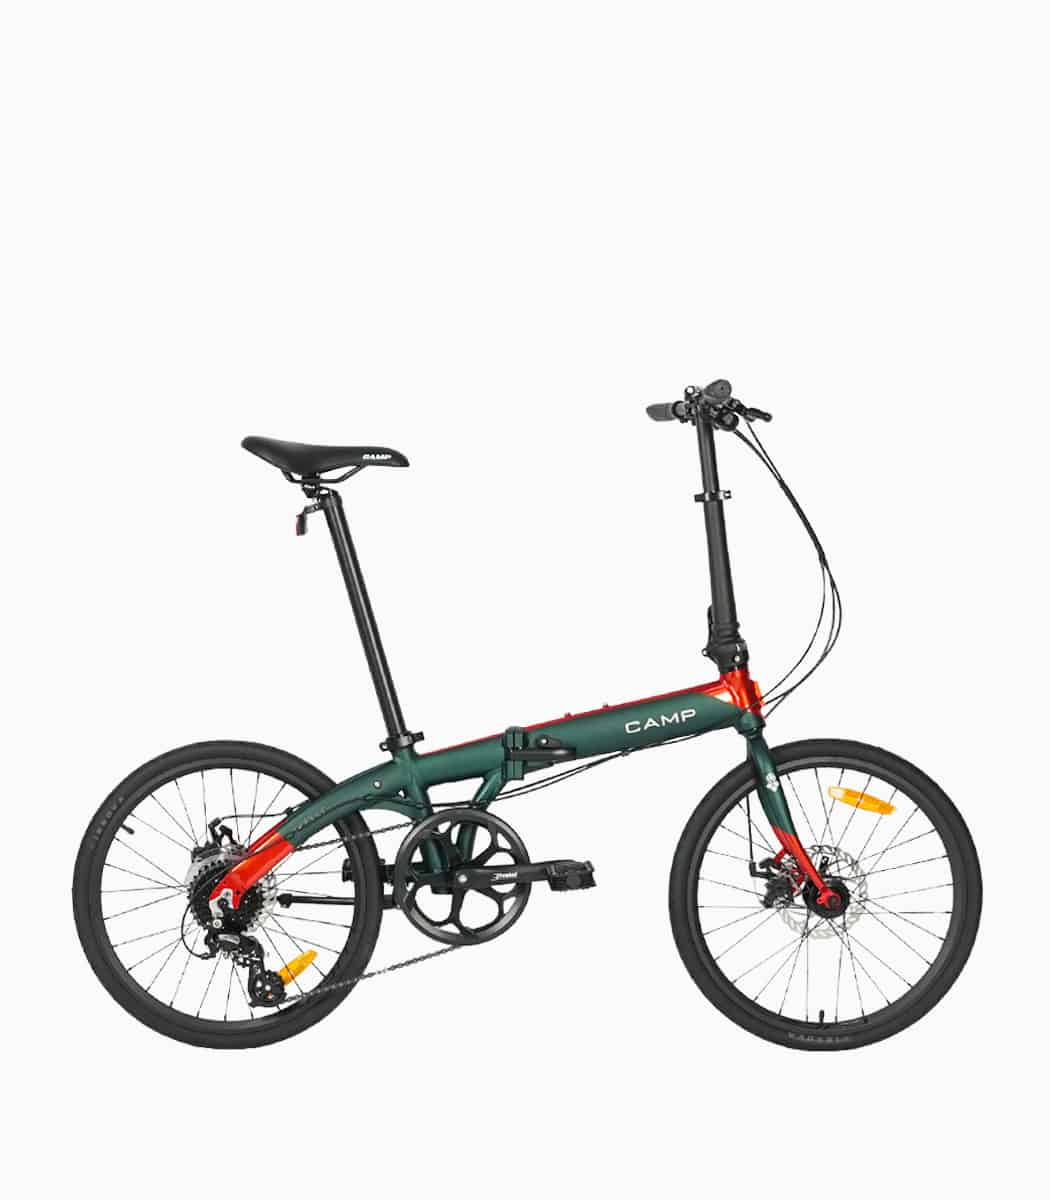 CAMP Polo 8 (DARK GREEN) foldable bicycle right